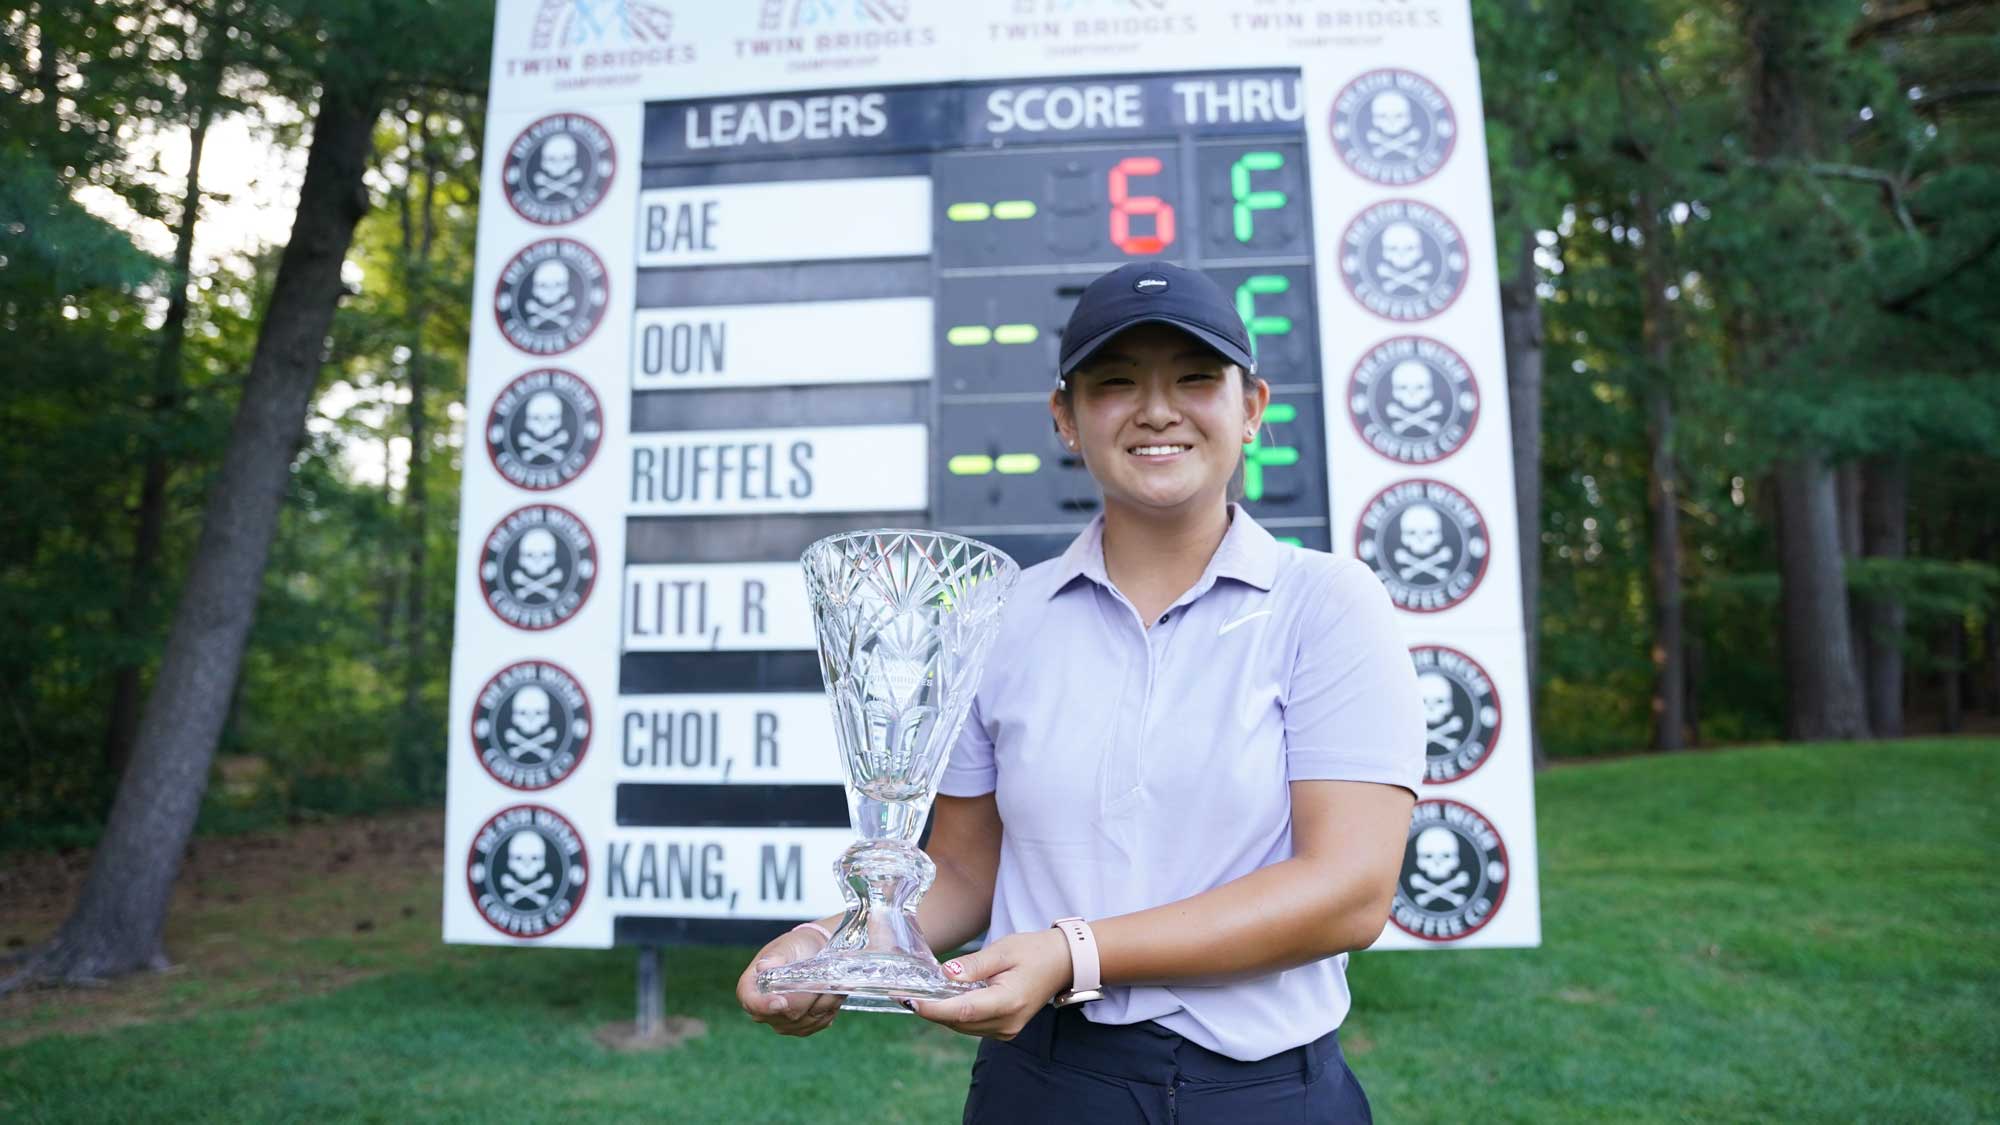 Jenny Bae with the trophy